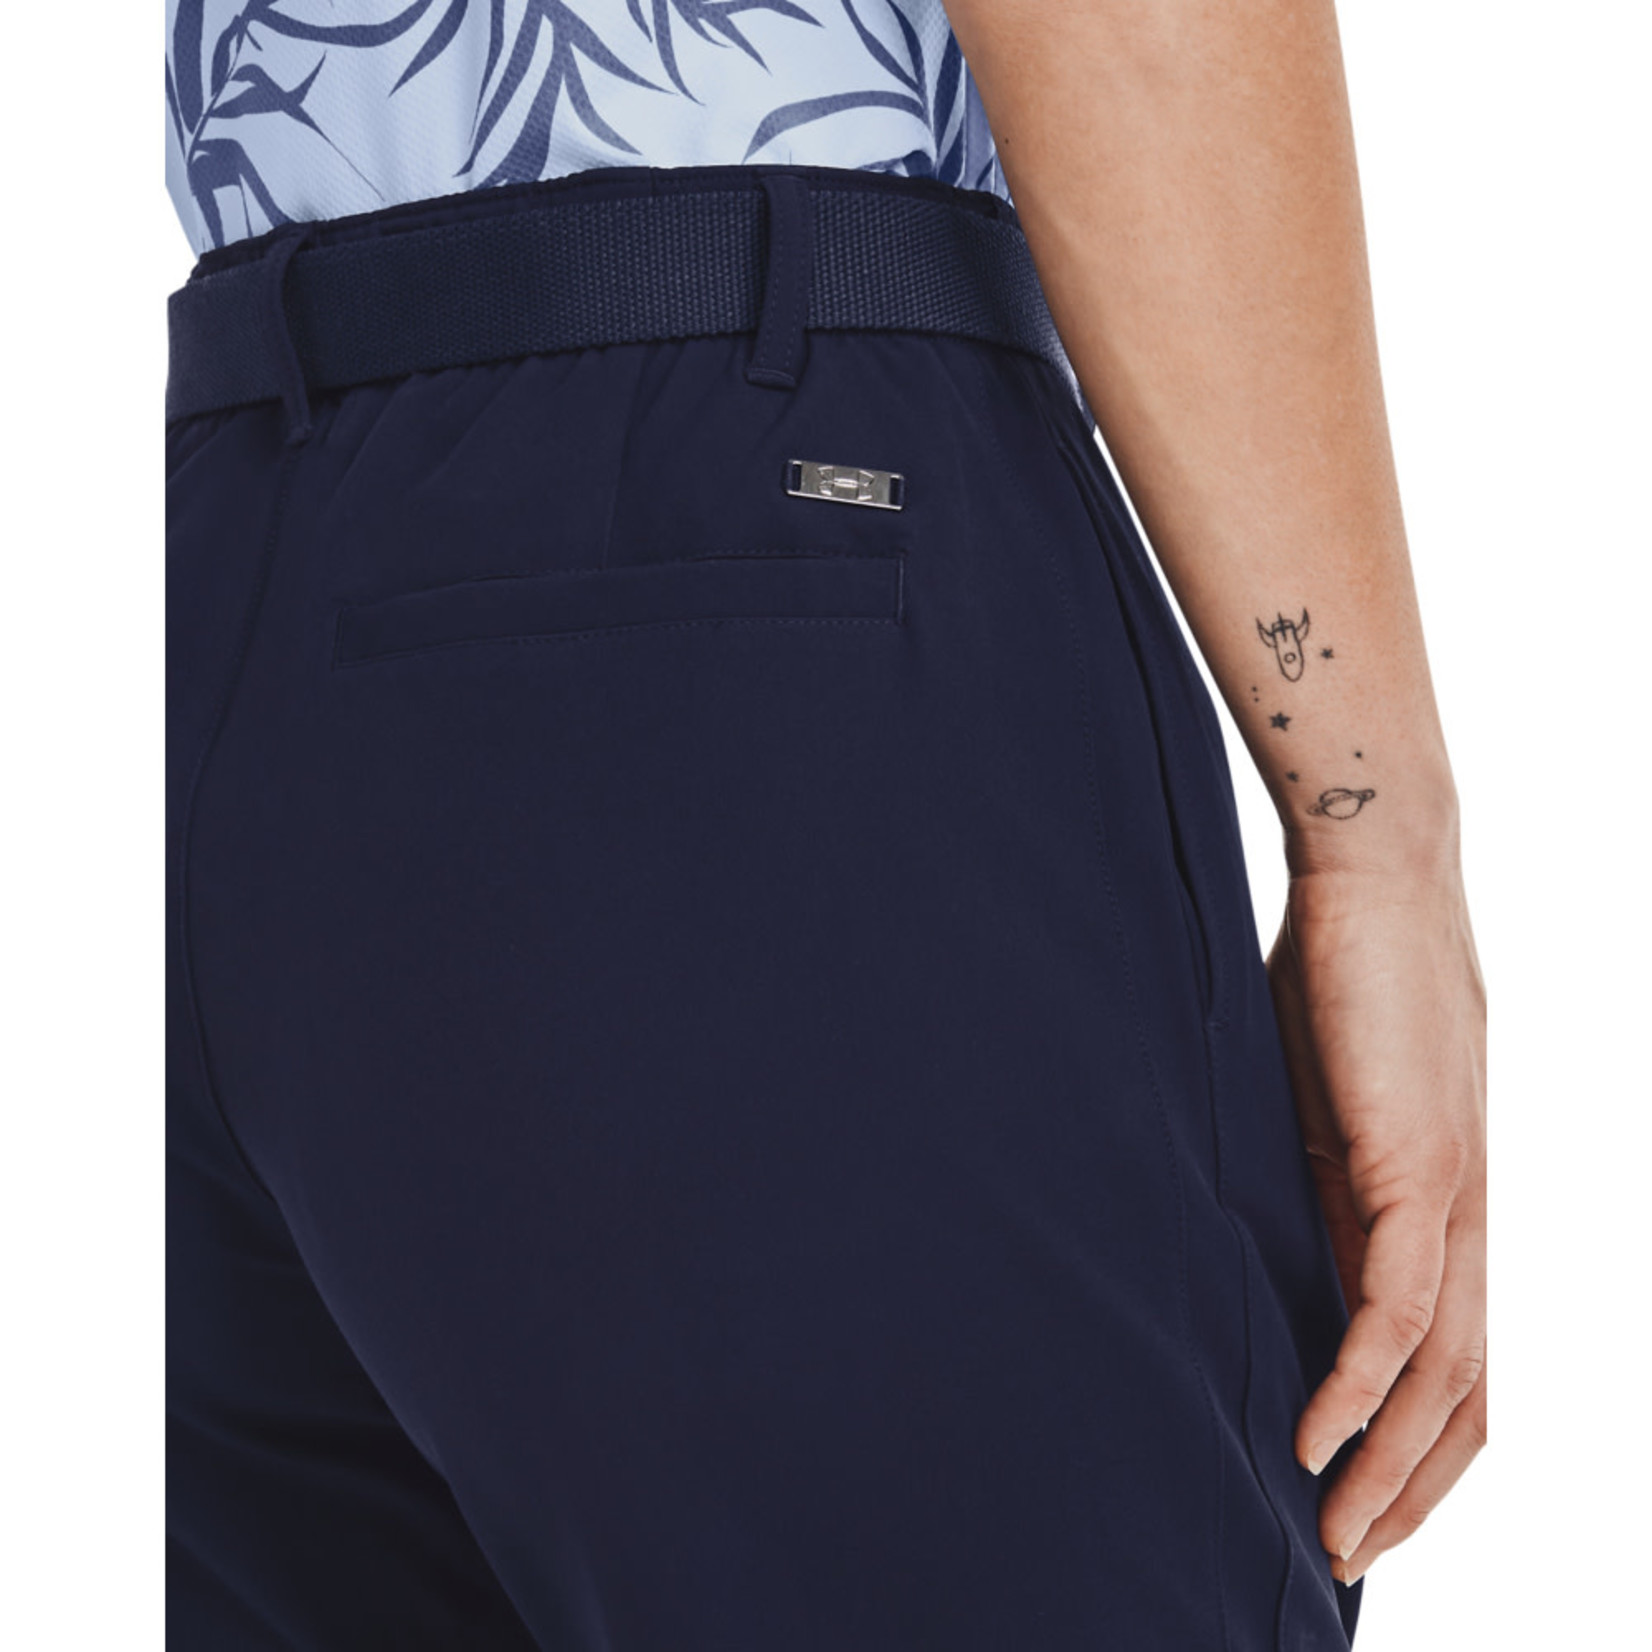 Under Armour Under Armour Womens LINKS  Pant - Midnight Navy